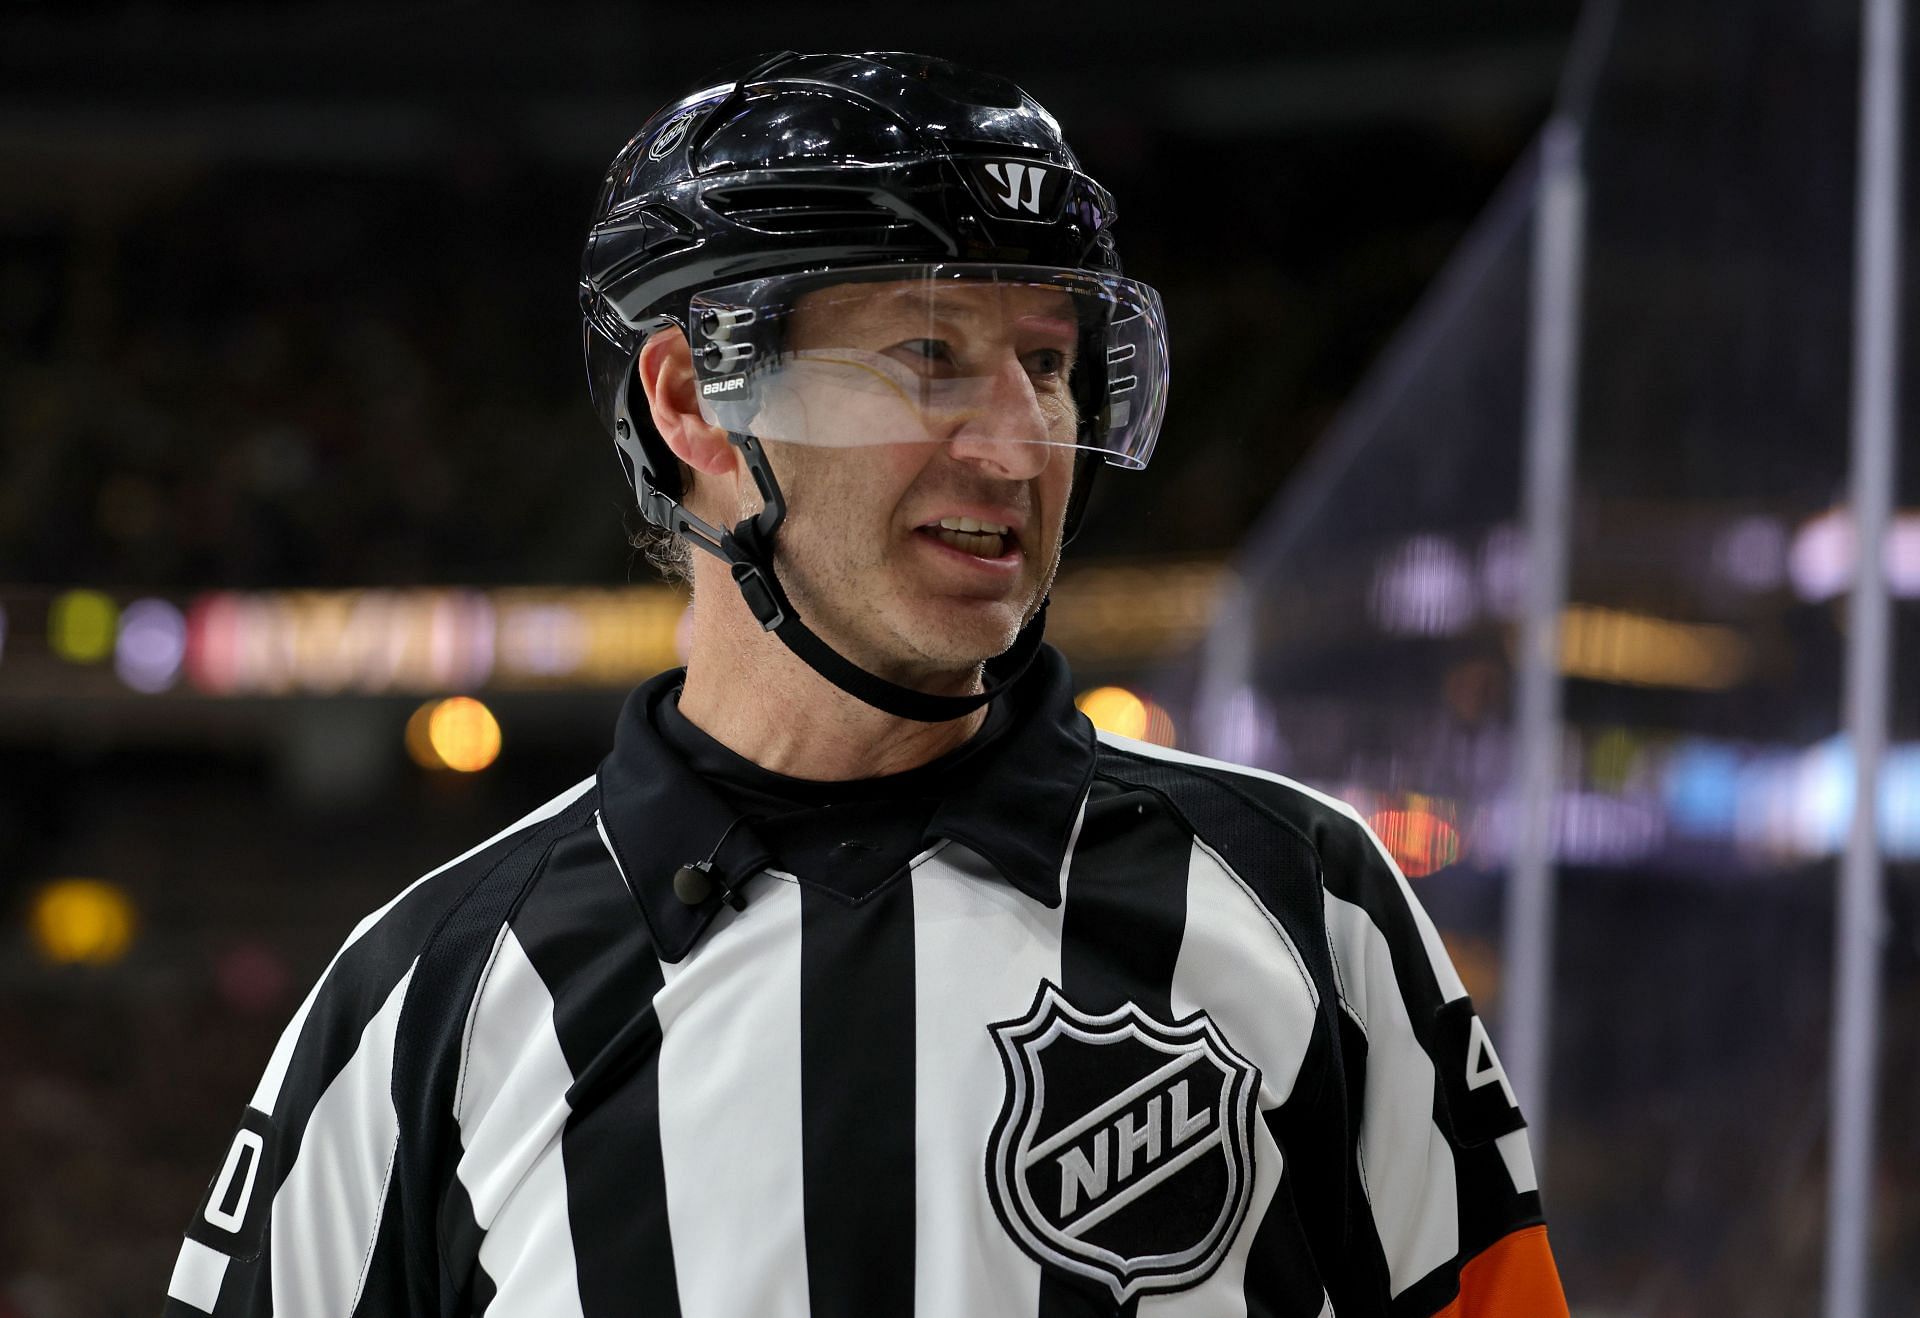 NHL referee's hot-mic call in Detroit Red Wings game ends his career